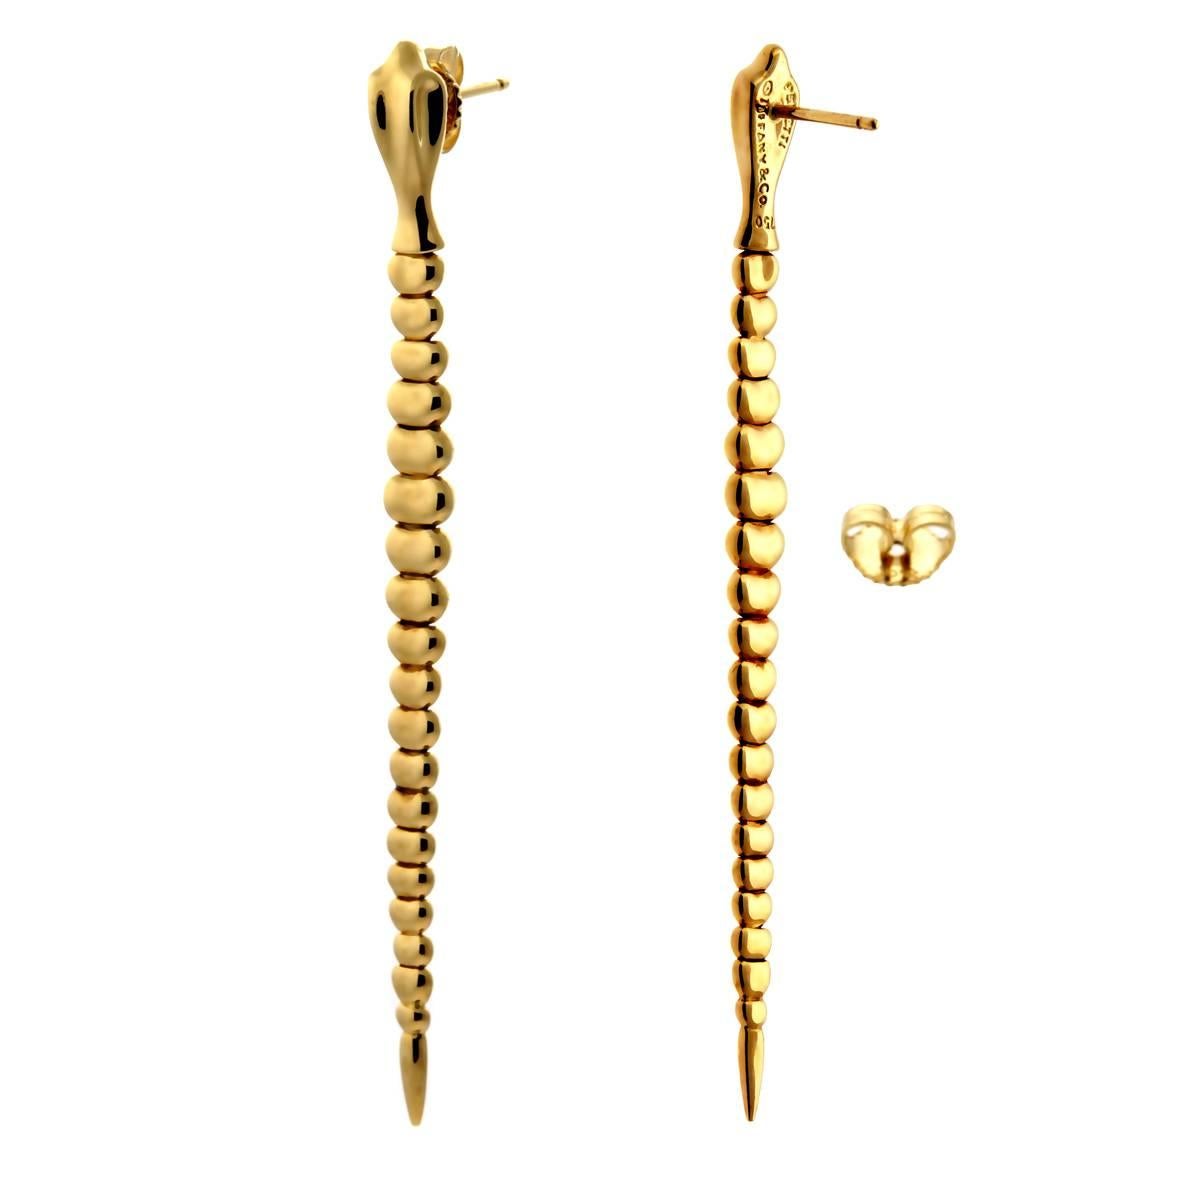 A chic pair of authentic Tiffany & Co snake motif earrings, these vibrant earrings are crafted in 18k yellow gold and feature a free flowing design.

Length: 2.75